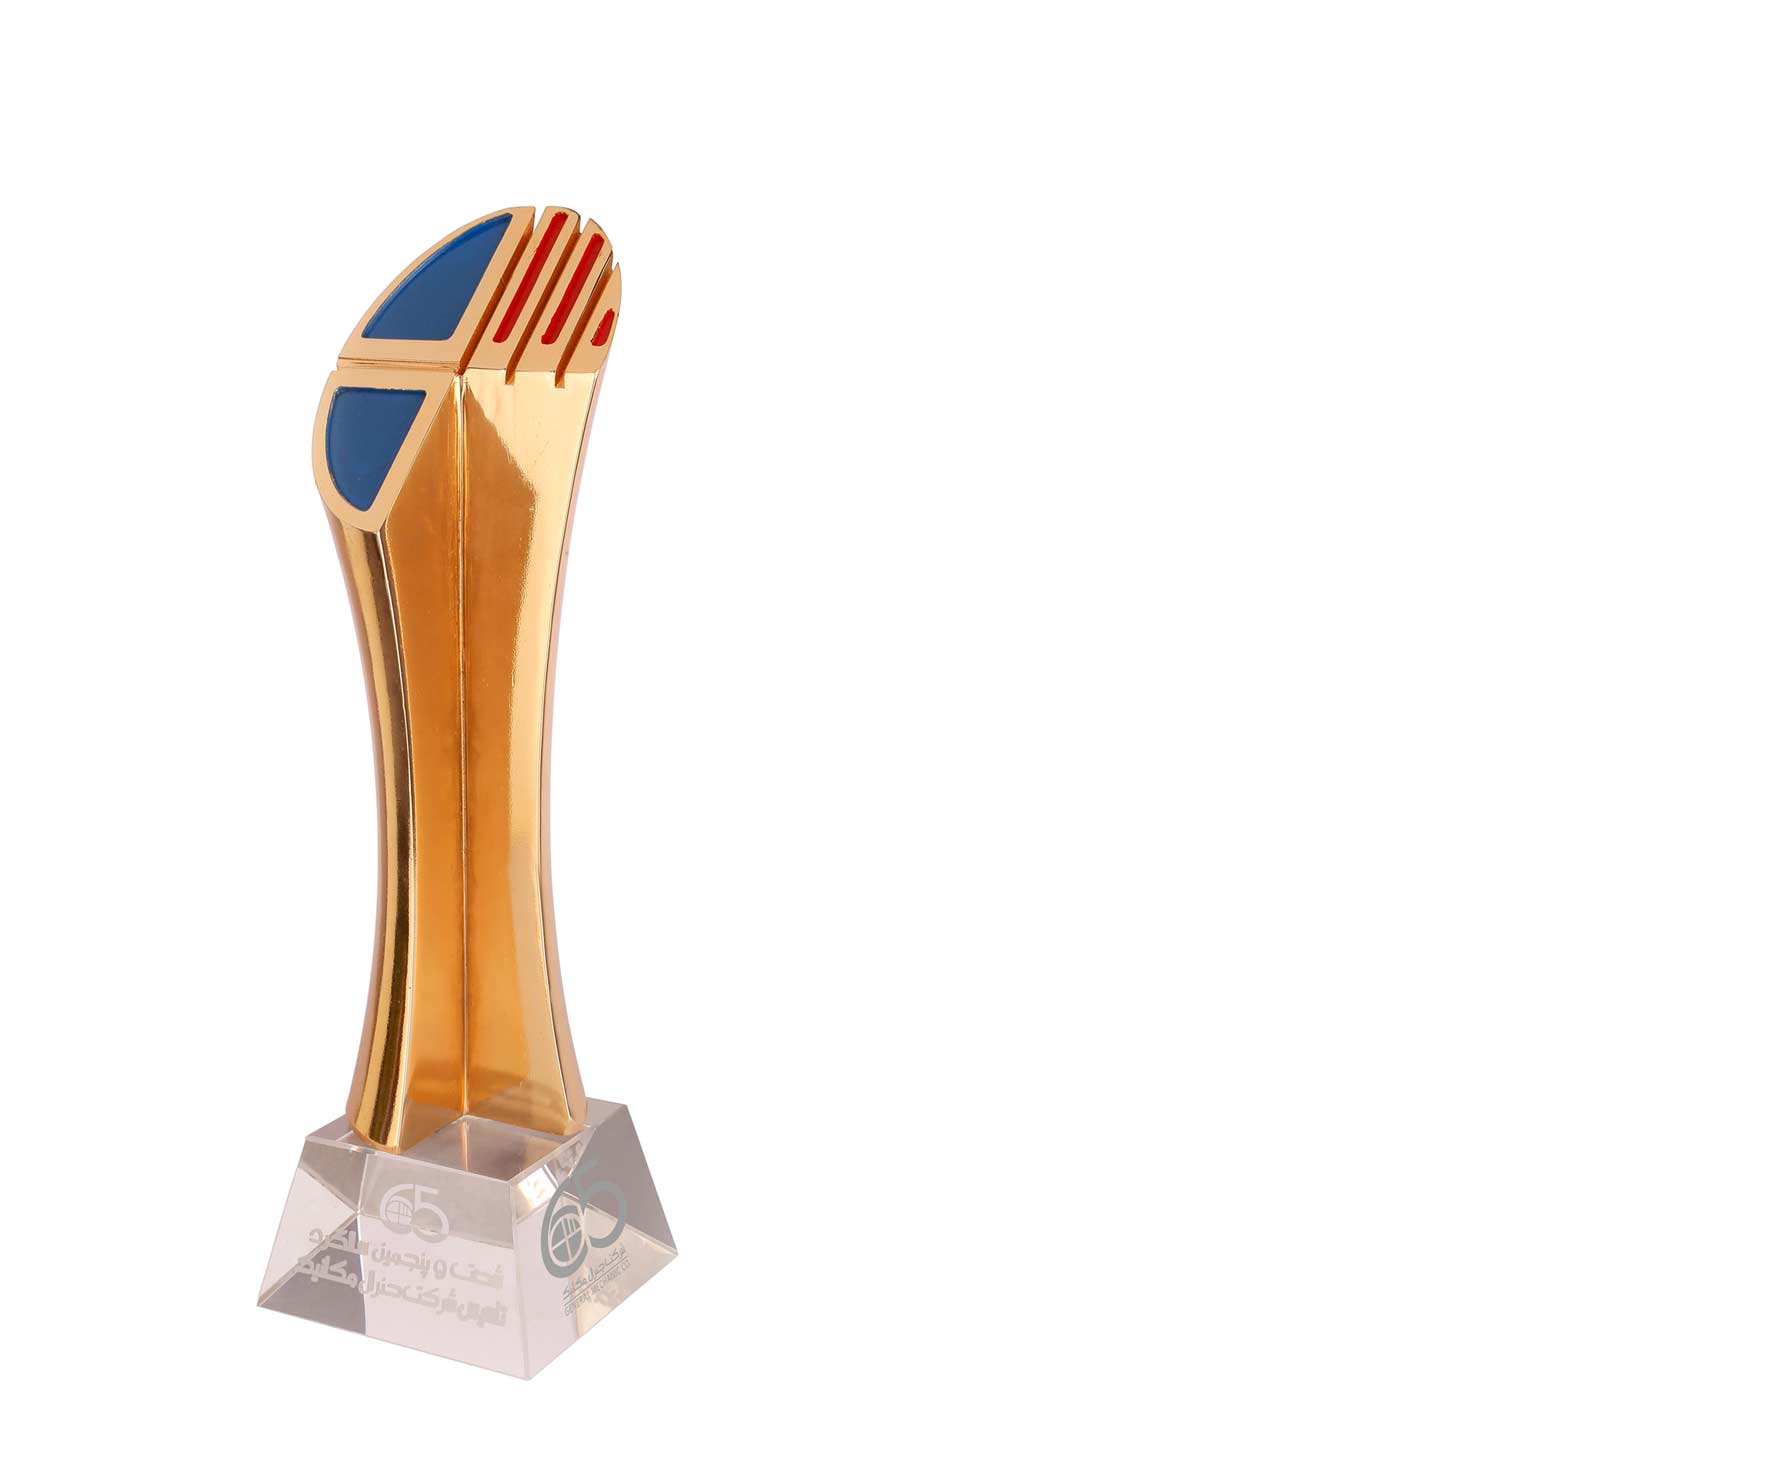 Design and Execution of General Mechanics Company Trophy (Brass & Crystal) - (Height 24 cm)